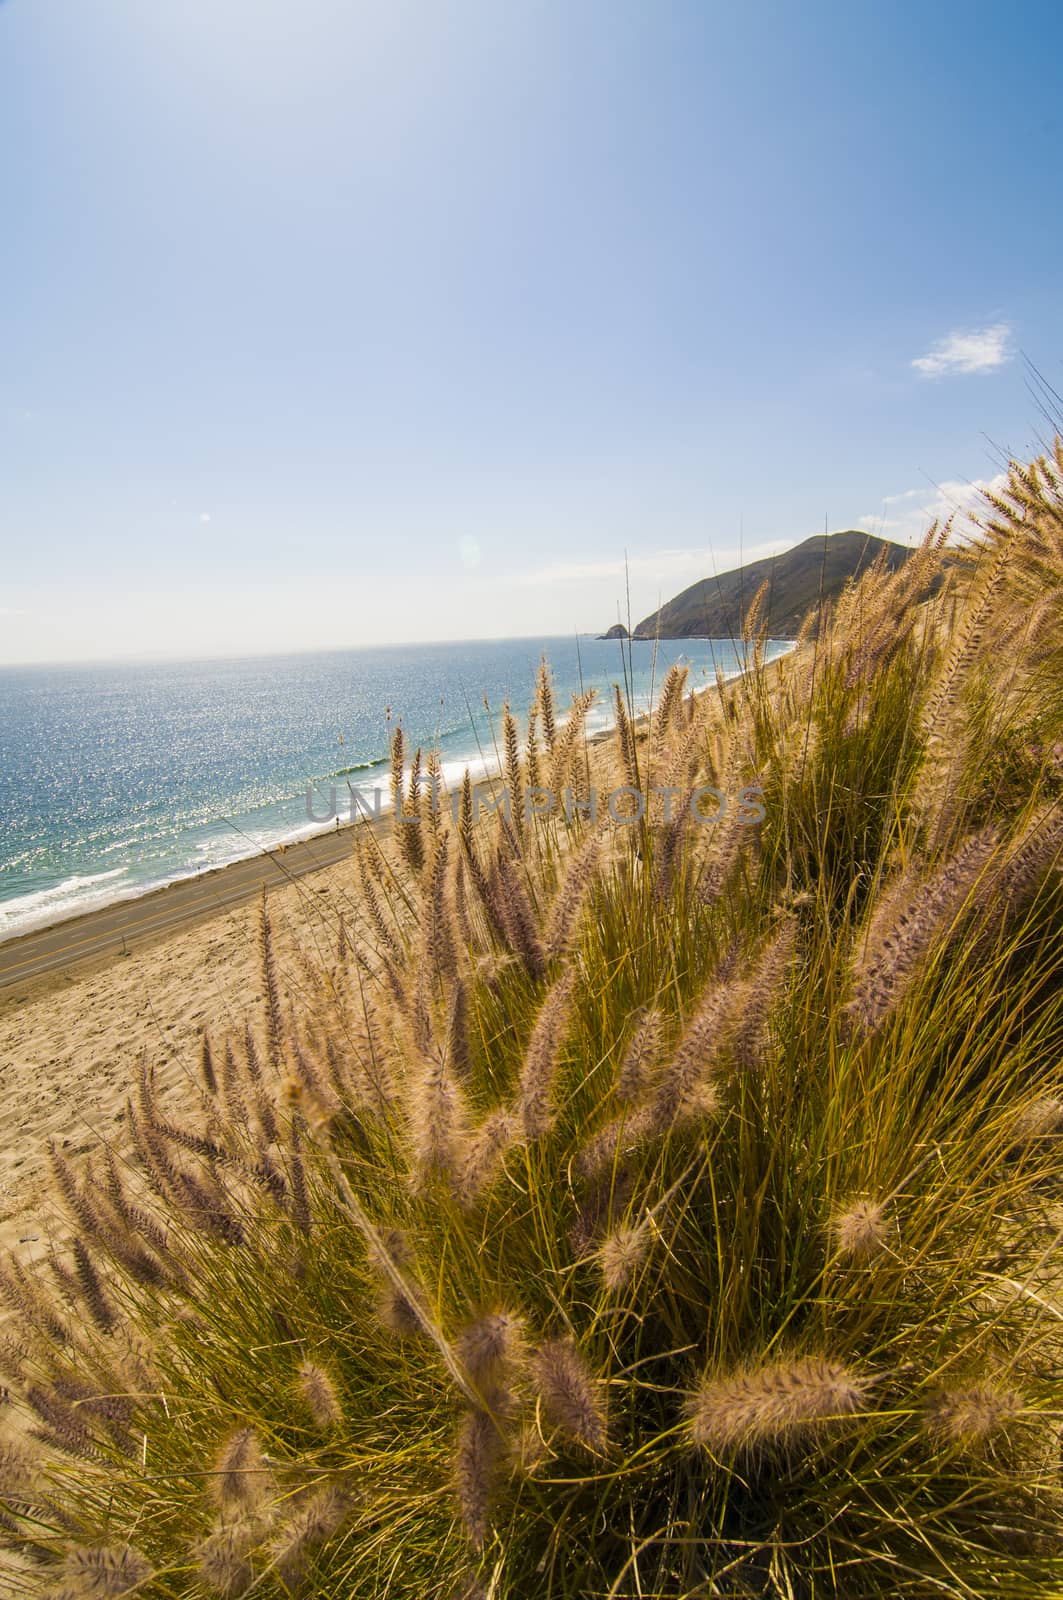 Dune grass with beach in background by Njean